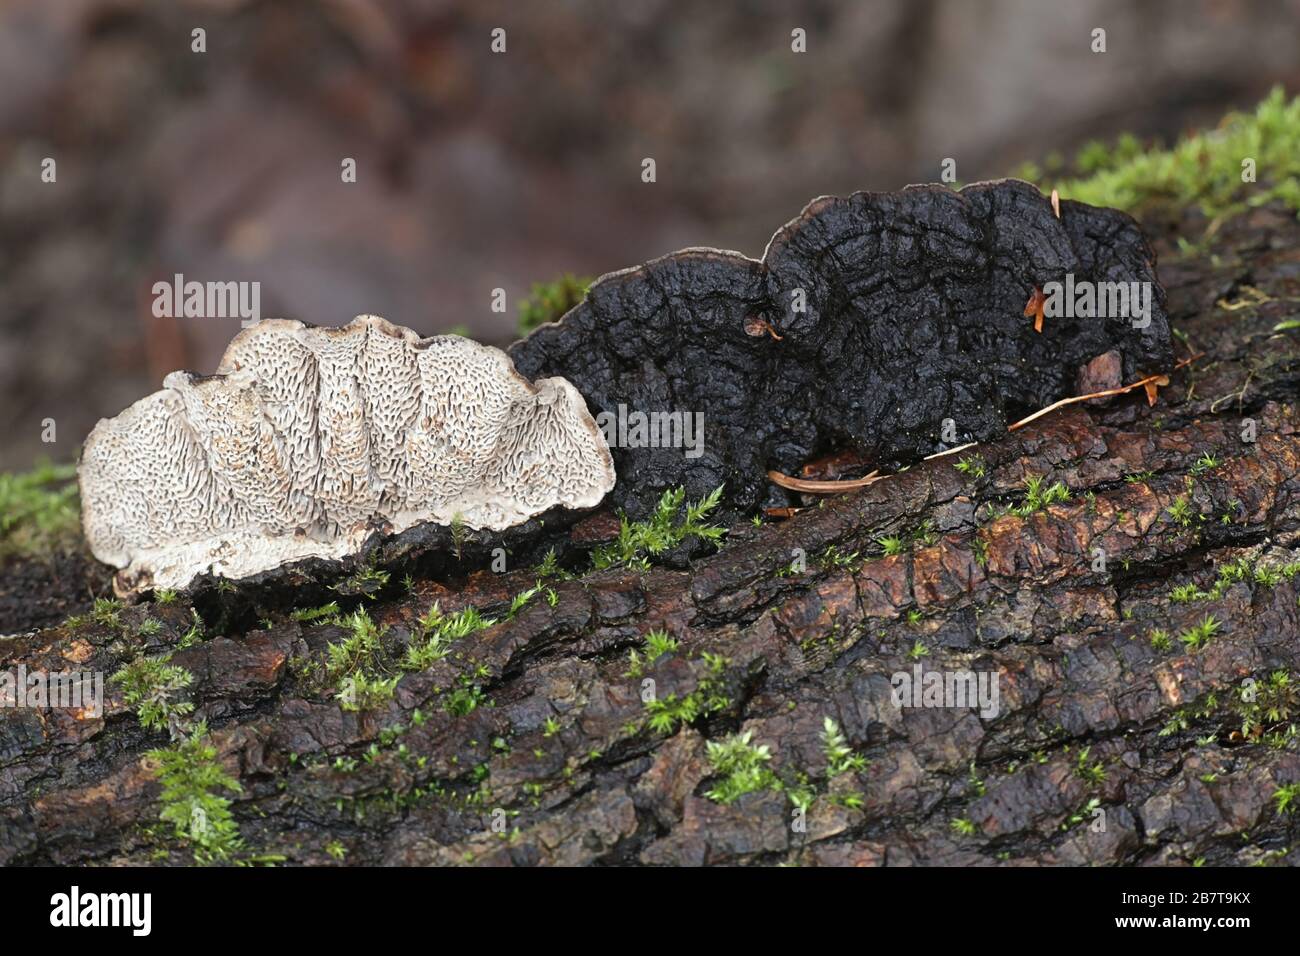 Datronia mollis, known as Common Mazegill, bracket fungus from Finland Stock Photo